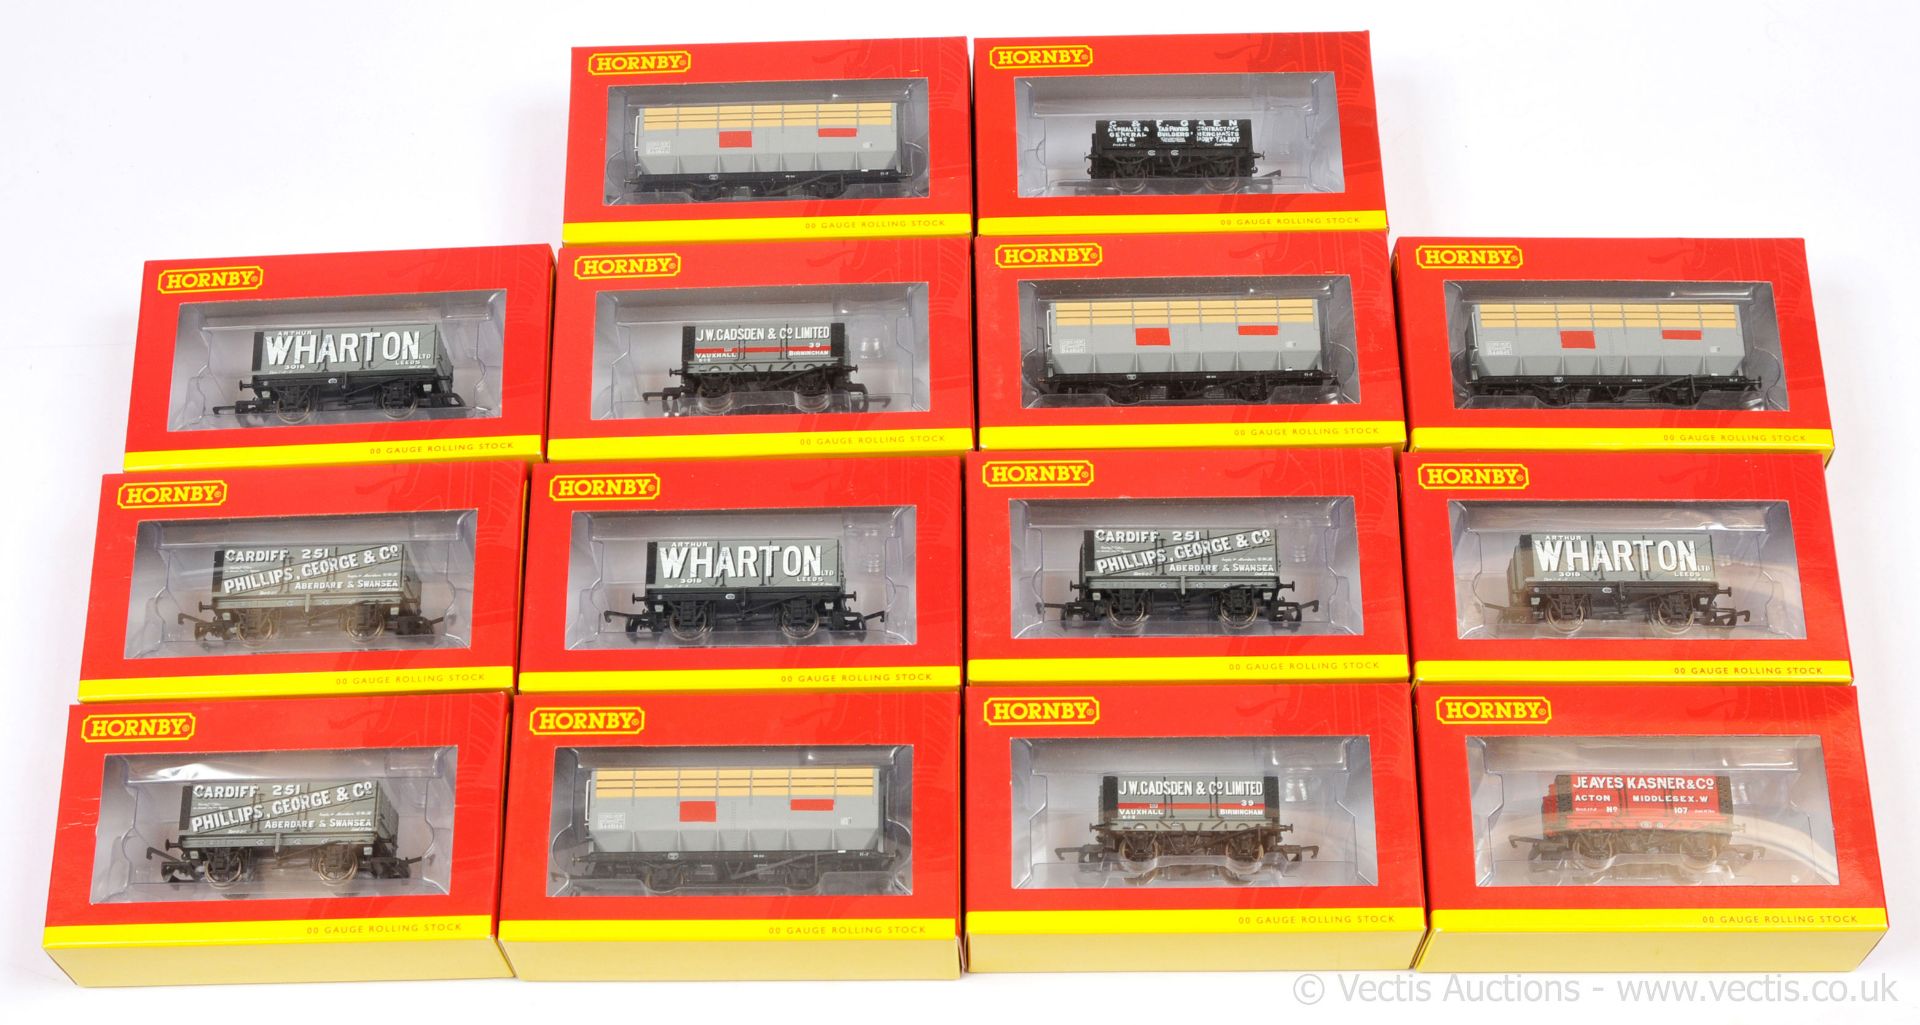 GRP inc Hornby (China) Goods Wagons (some